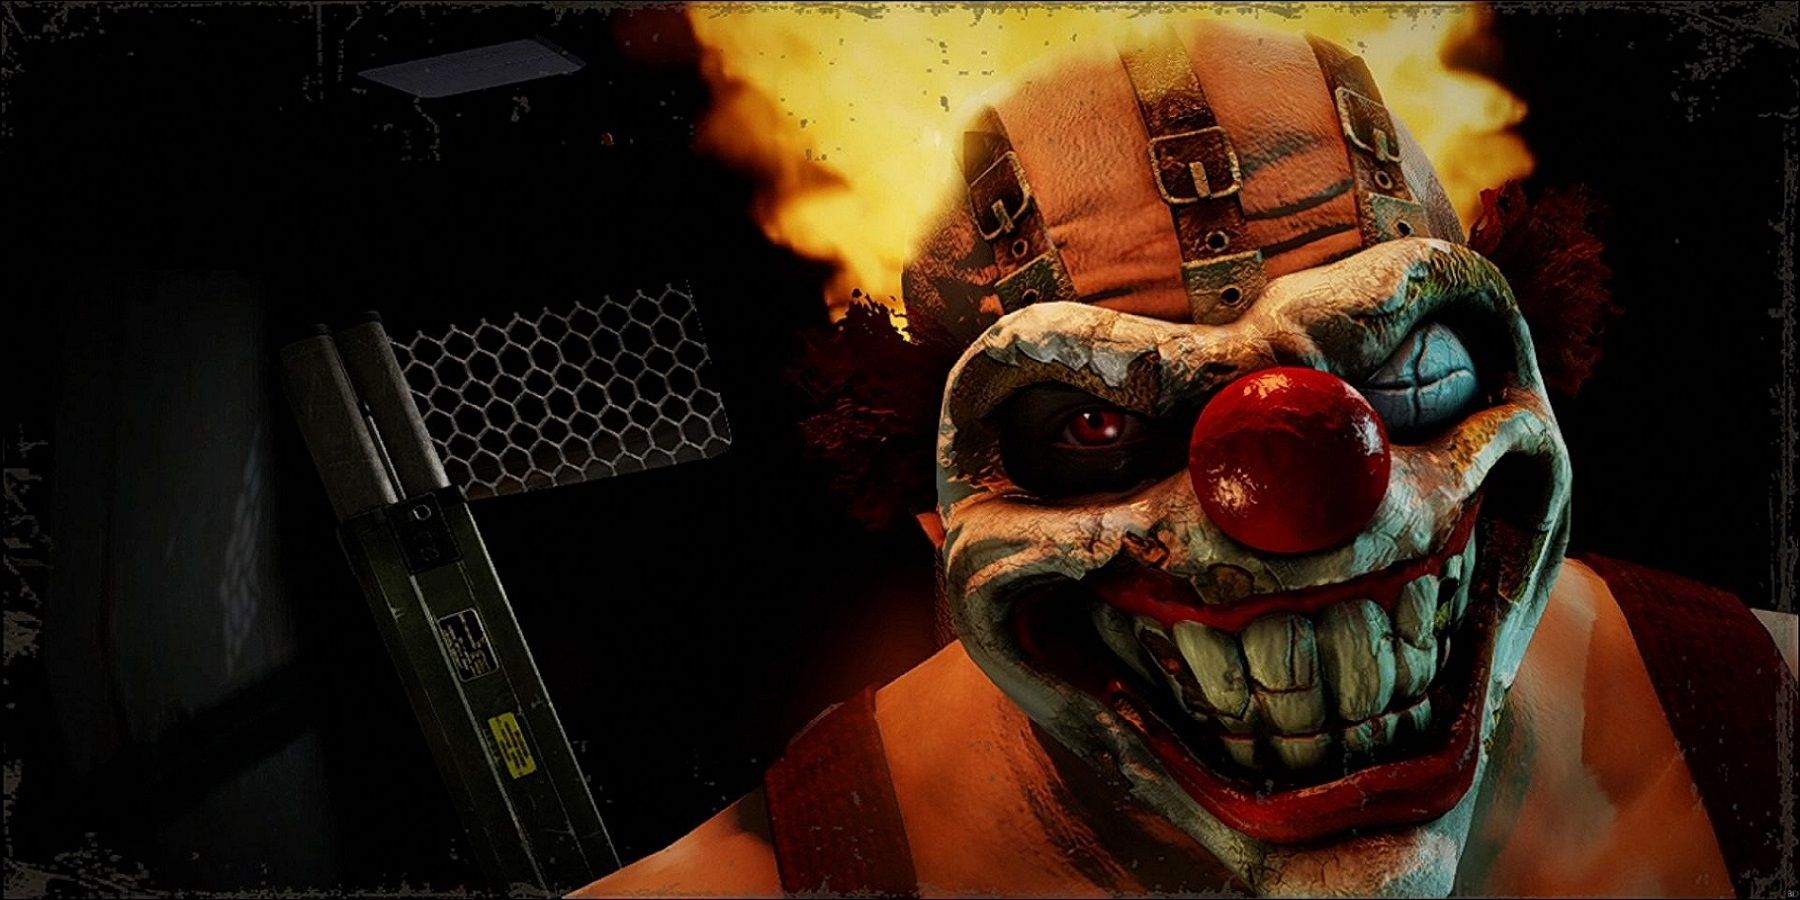 Twisted Metal's Sweet Tooth nearly made a guest appearance in Mortal Kombat.